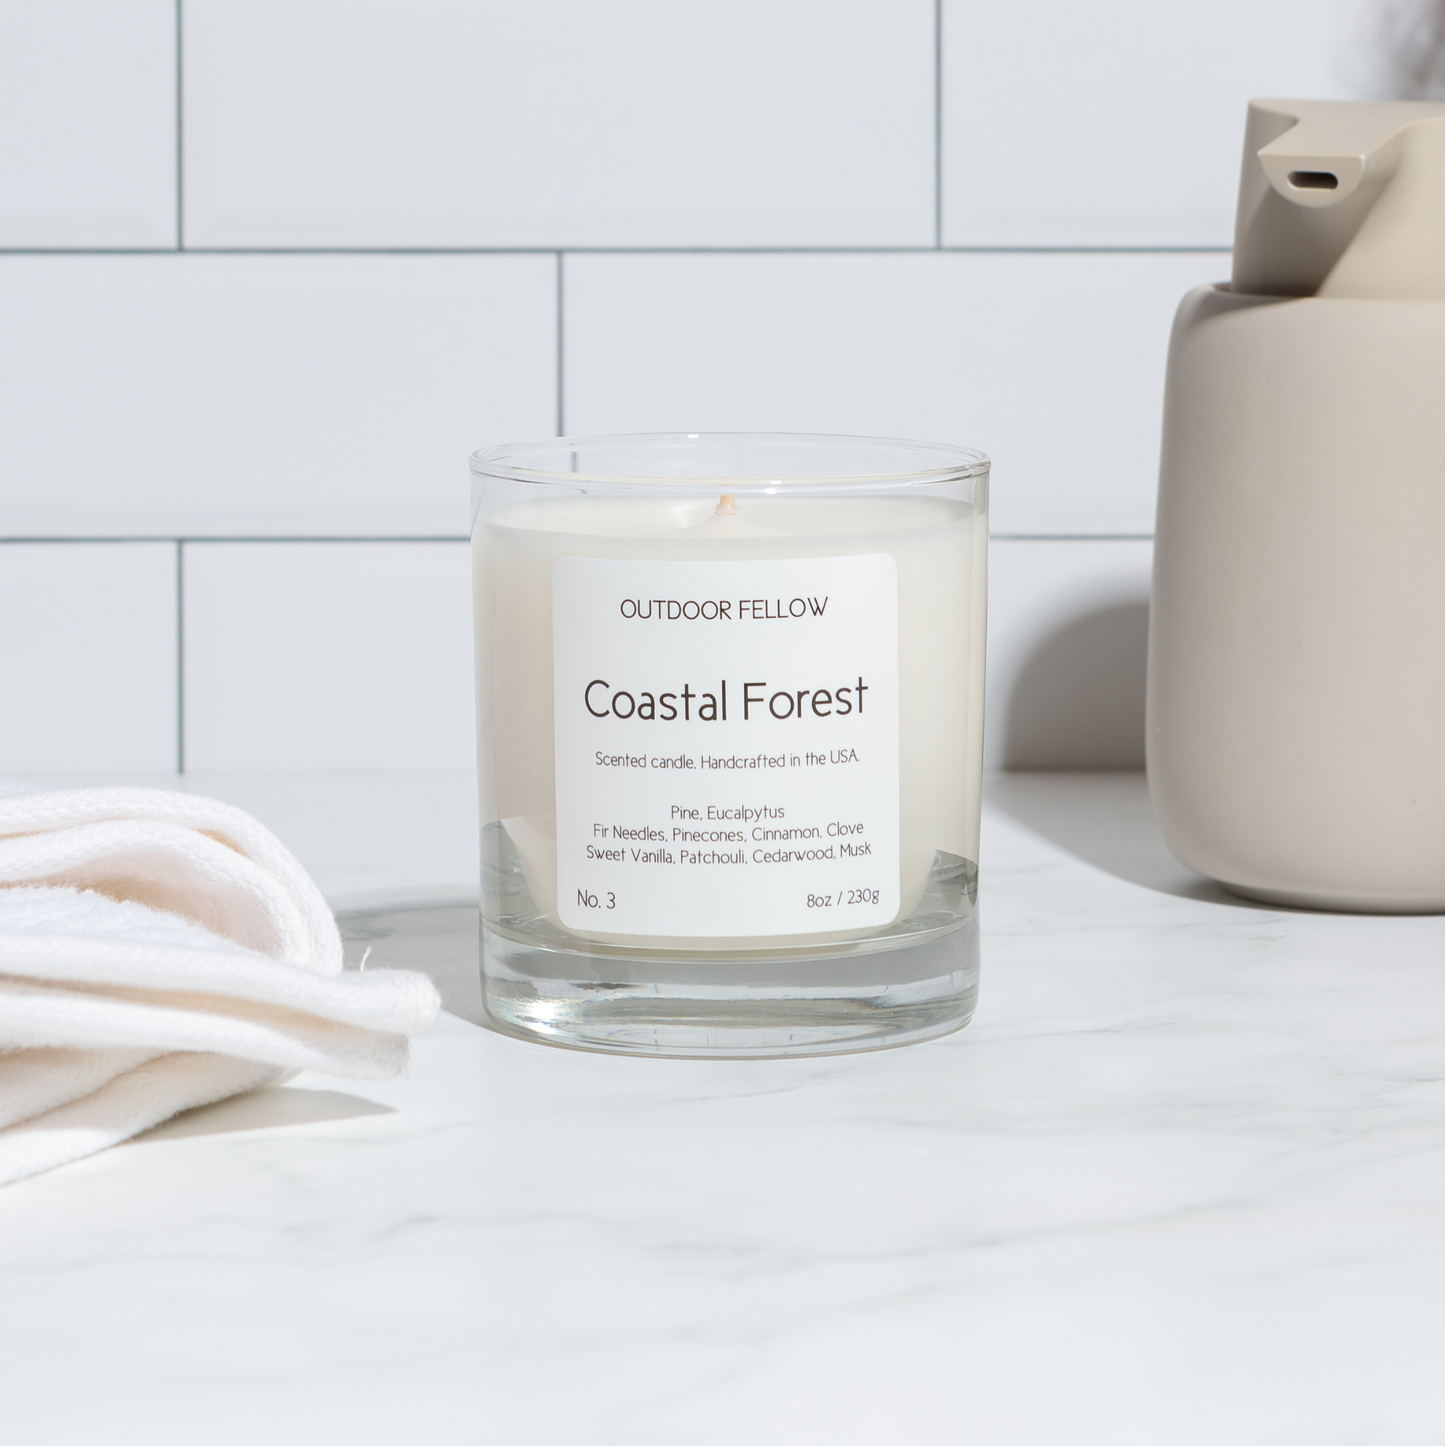 Coastal Forest scented candle next to a towel and soap dispenser in a bathroom setting